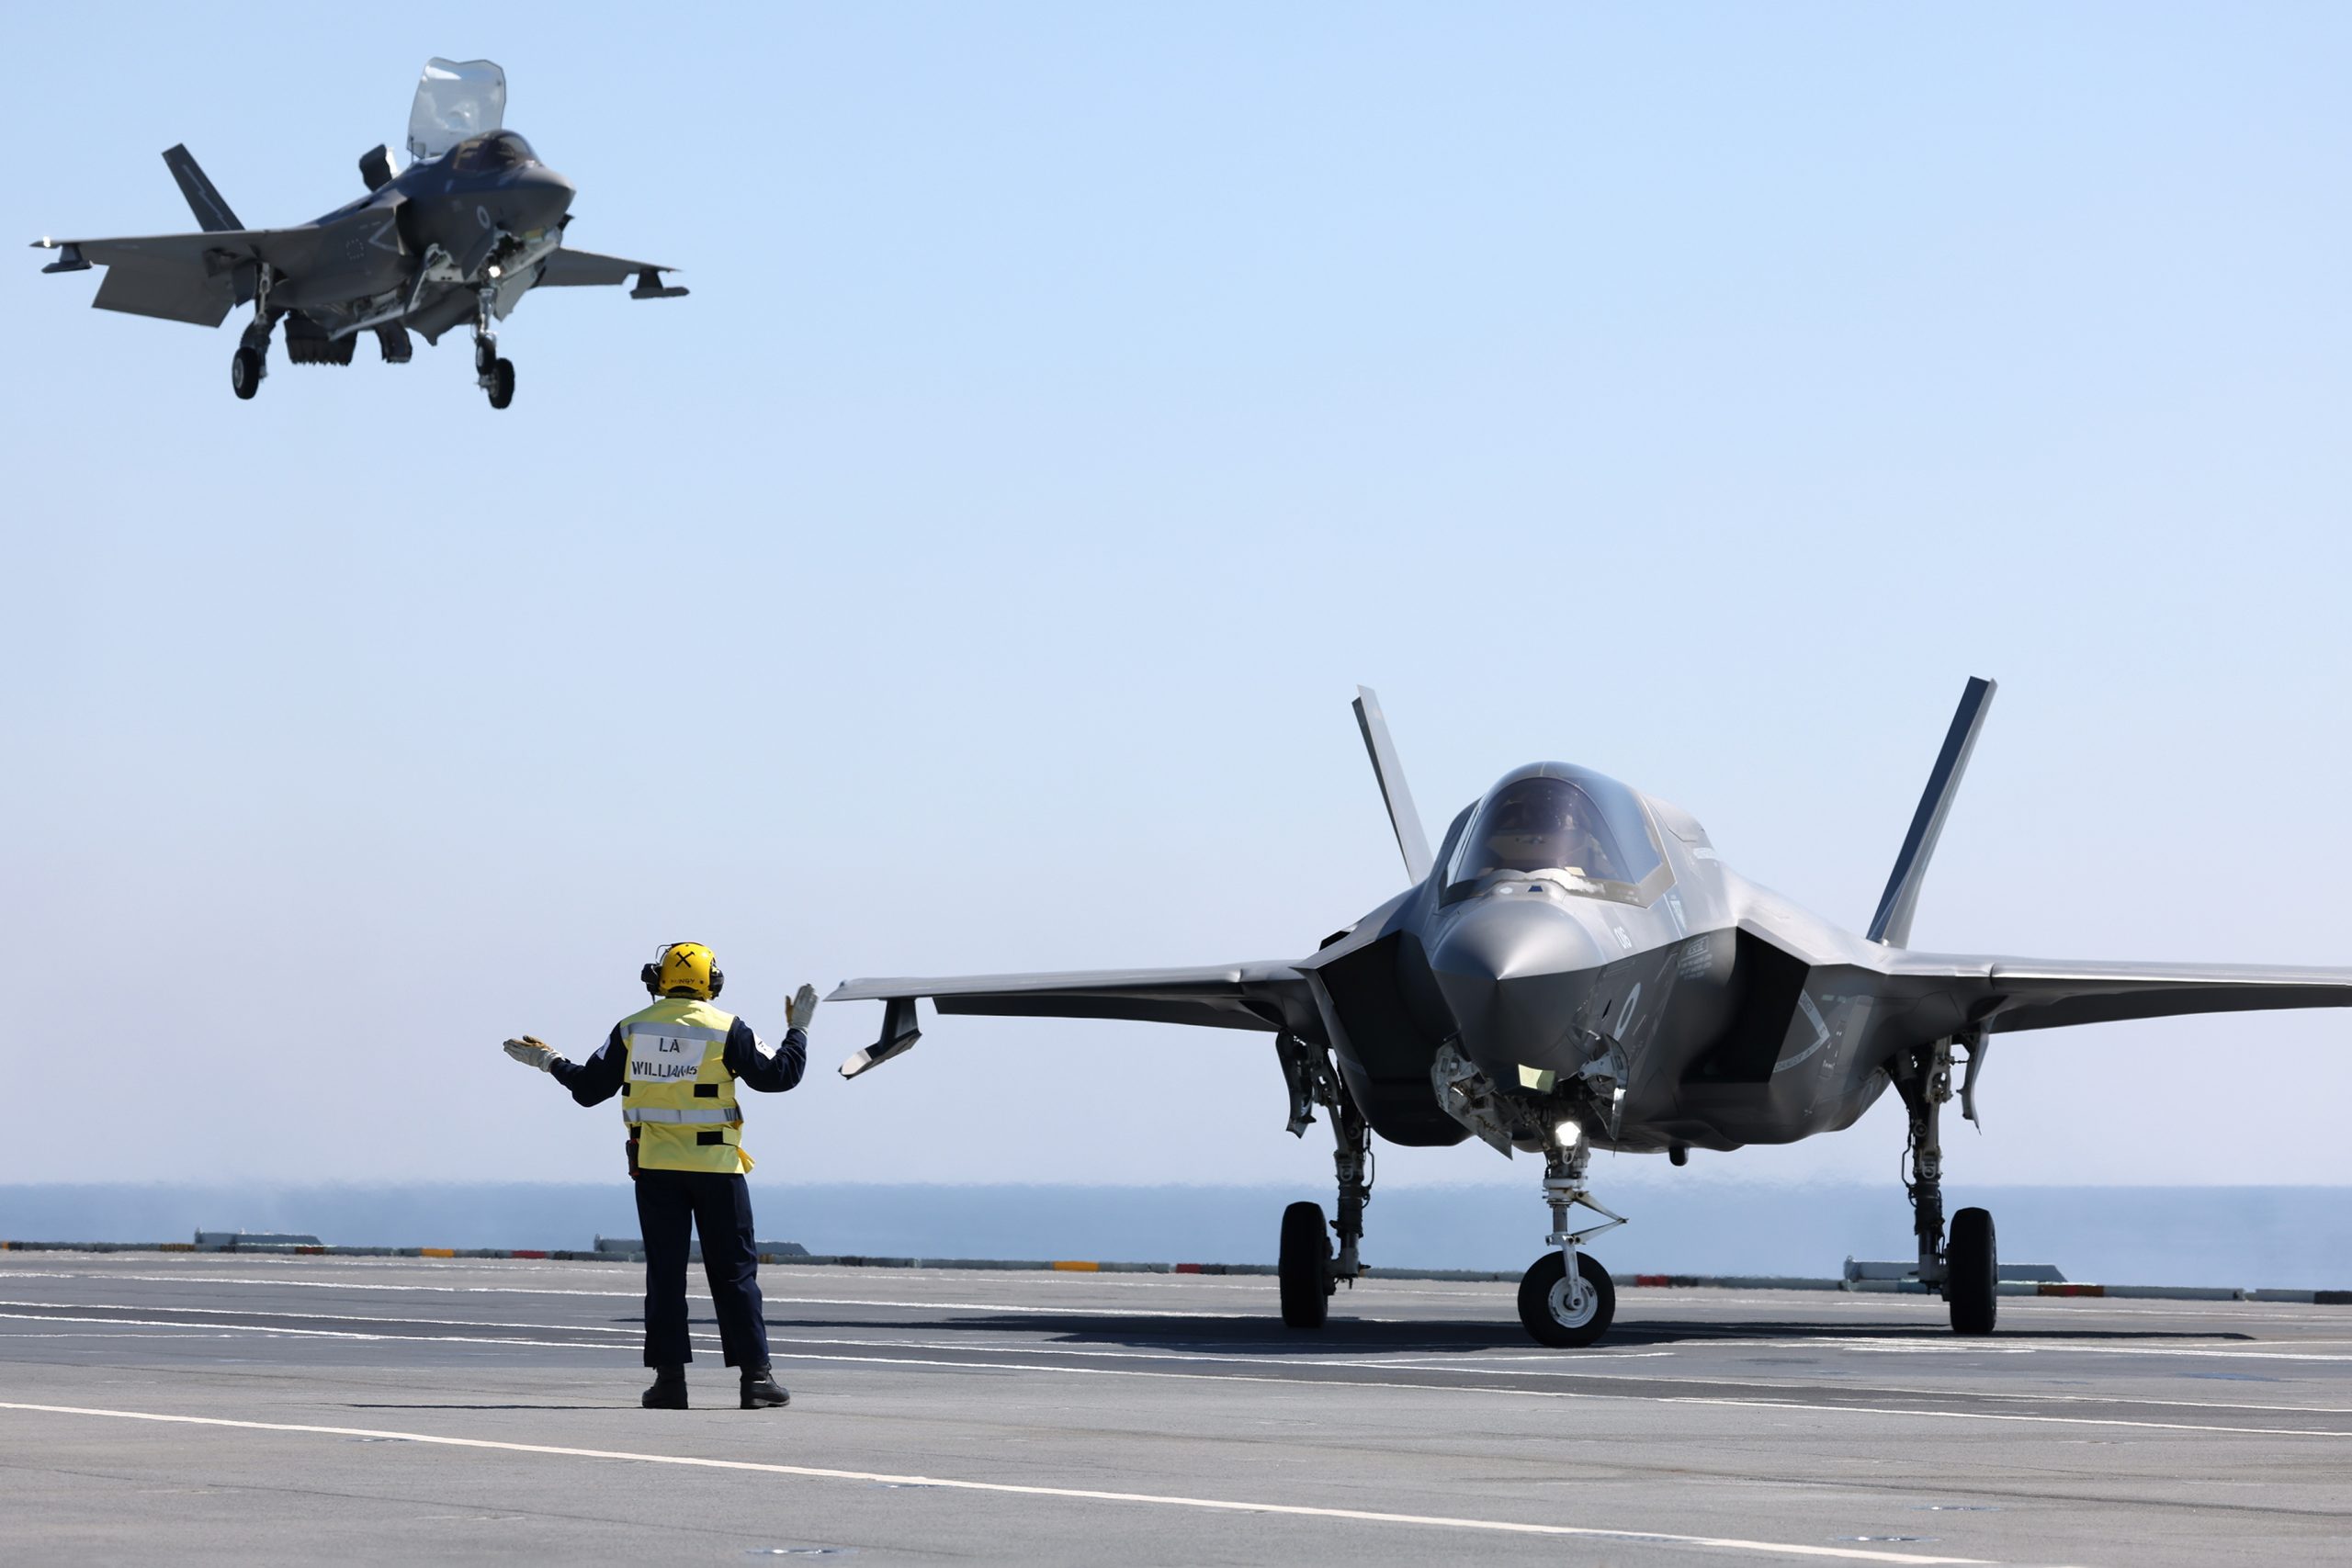 F-35B Jets To Join The Fight Against Daesh From The Carrier Strike Group